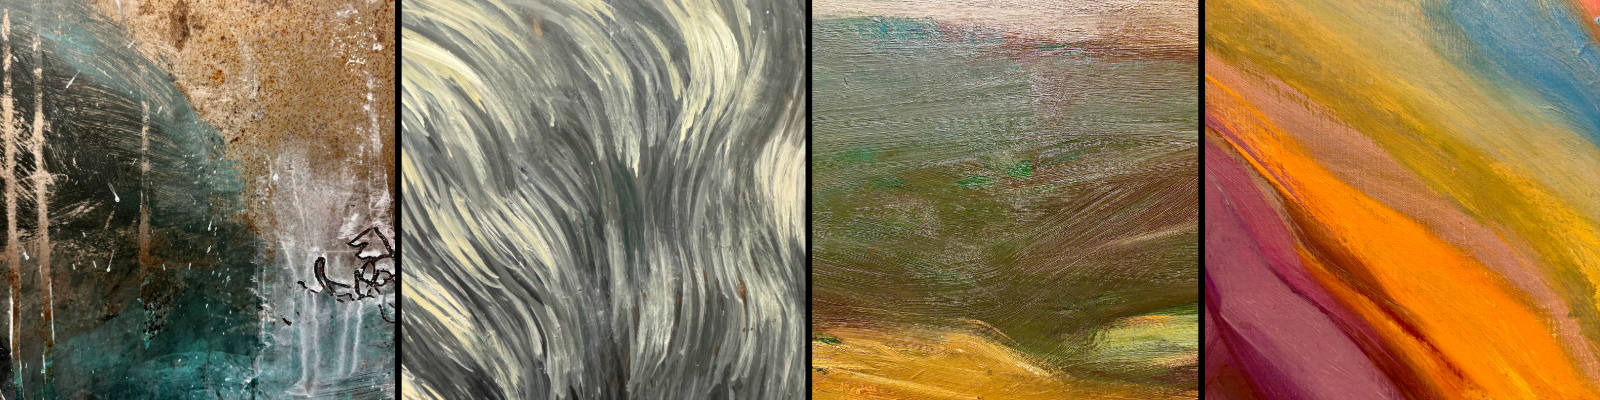 close up images of paintings